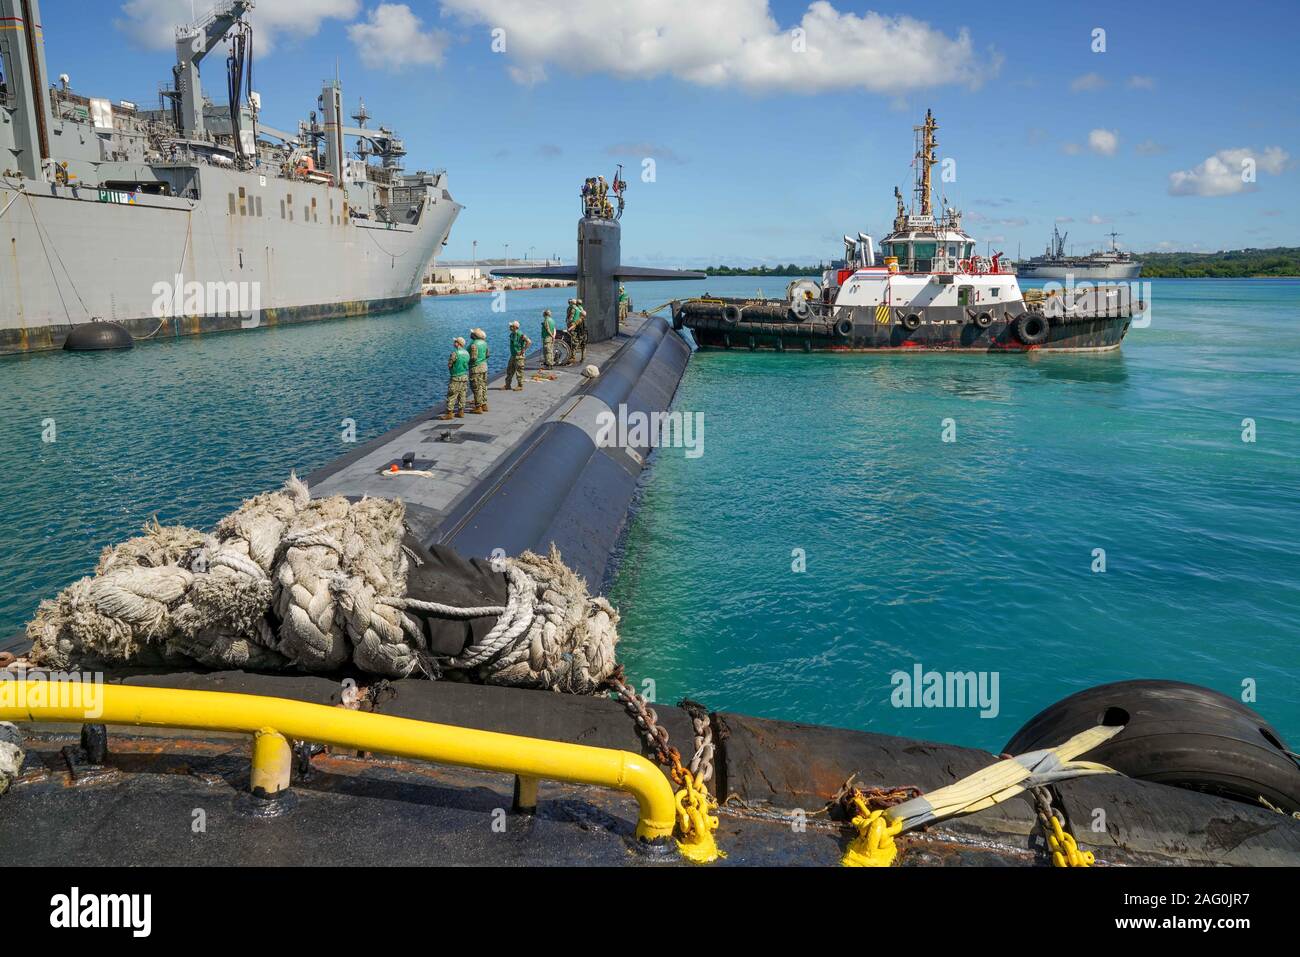 The U.S. Navy Los Angeles-class fast attack submarine USS Key West prepare to moor to the Lewis and Clark-class dry cargo and ammunition ship USNS Richard E. Byrd at Naval Base Guam December 10, 2019 in Santa Rita, Guam. Naval Base Guam is home to four Los Angeles-class attack submarines in the 7th Fleet and supports allied operations in Asia. Stock Photo